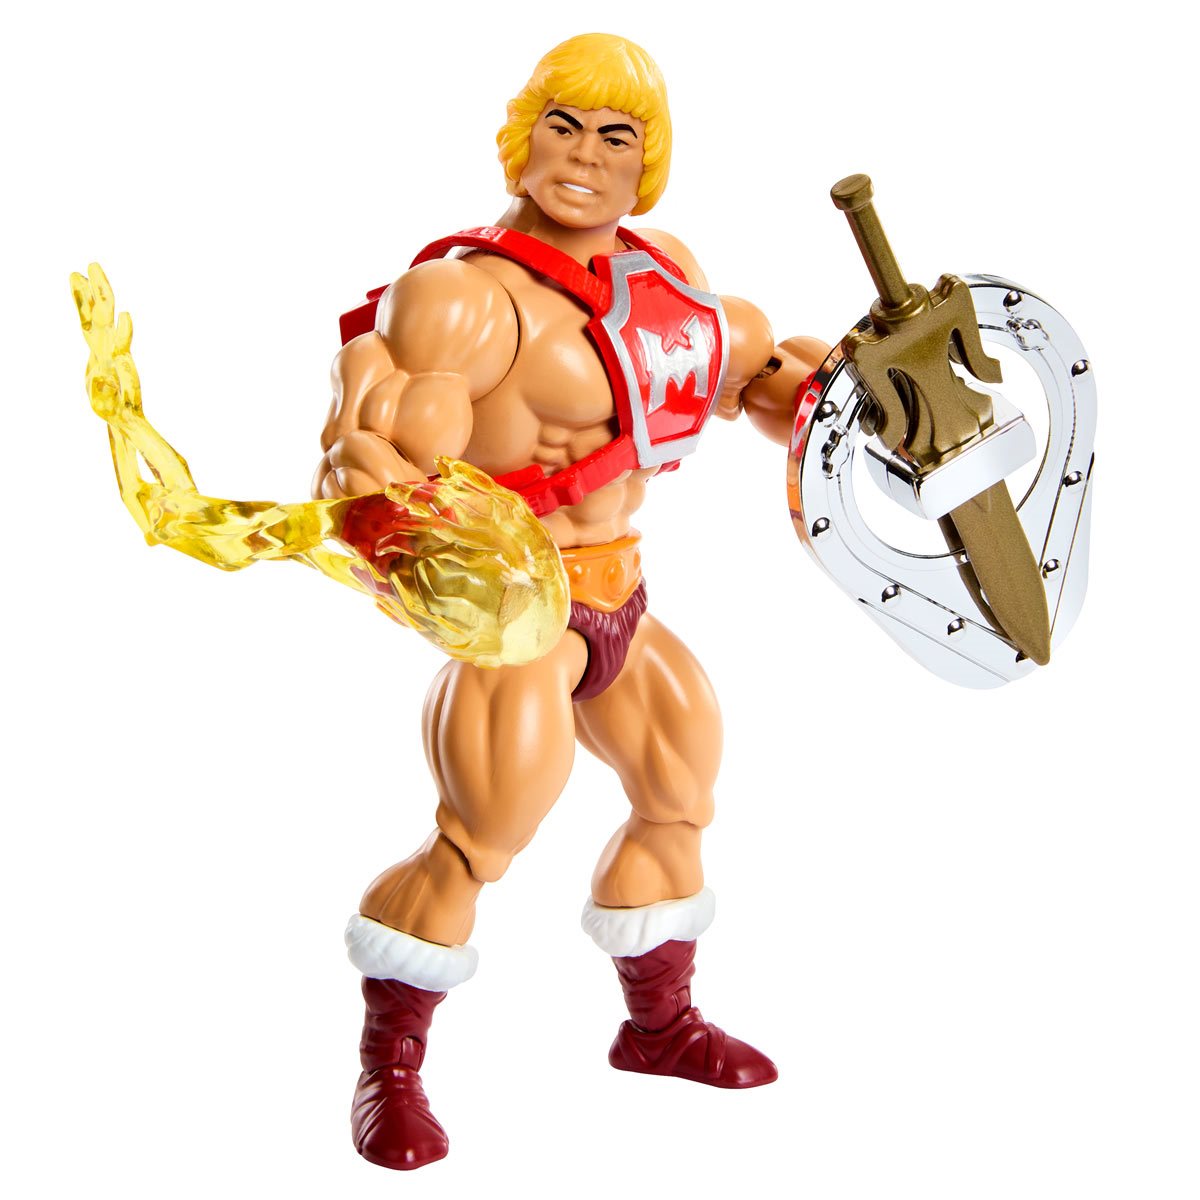 Masters of the Universe Origins Deluxe - Thunder Punch He-Man